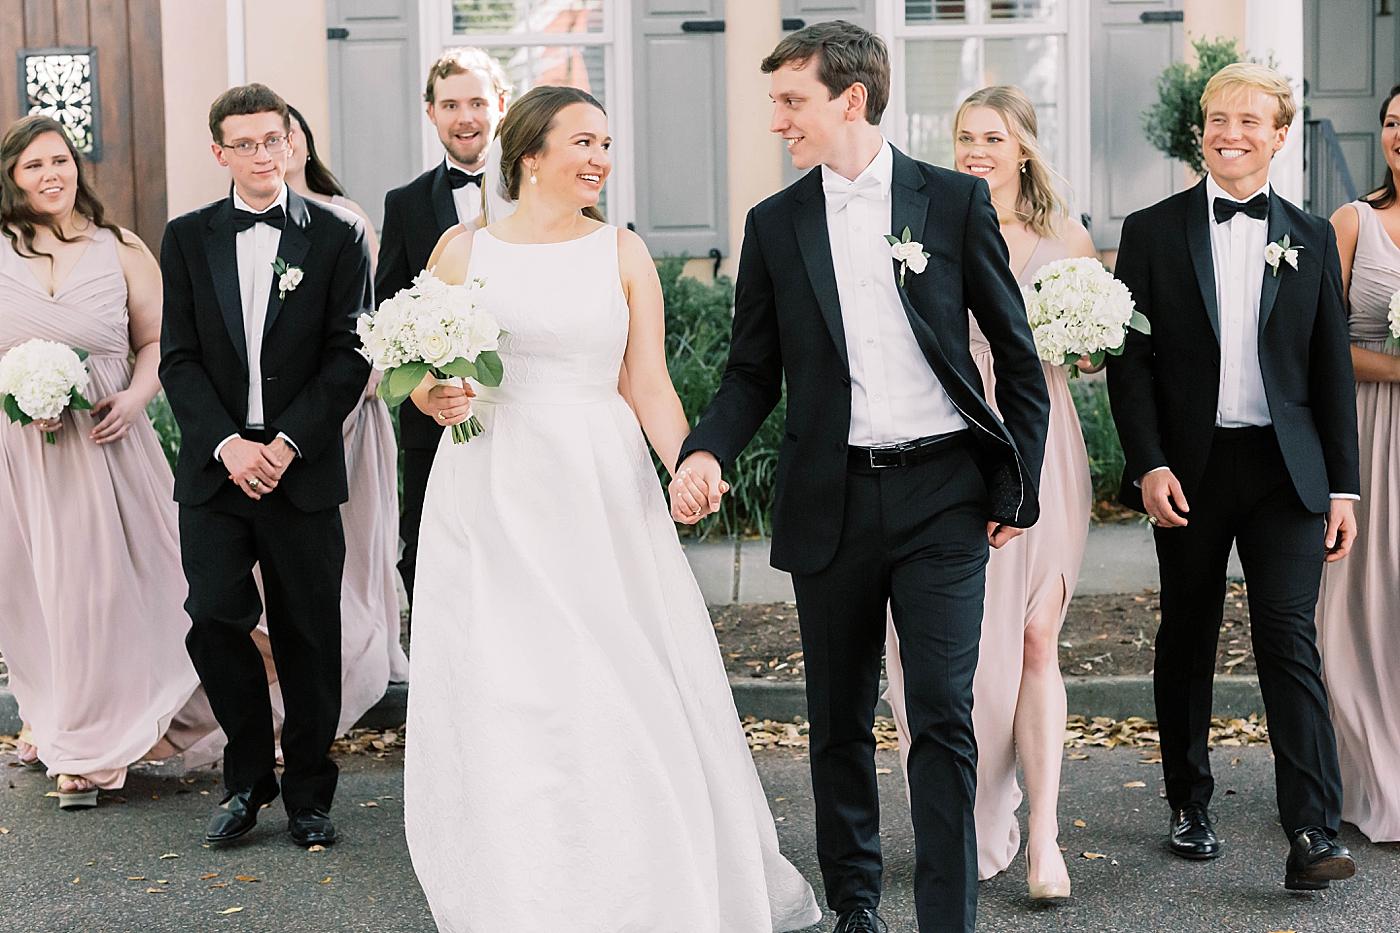 Bride and groom walking with their wedding party | Carters Event Co